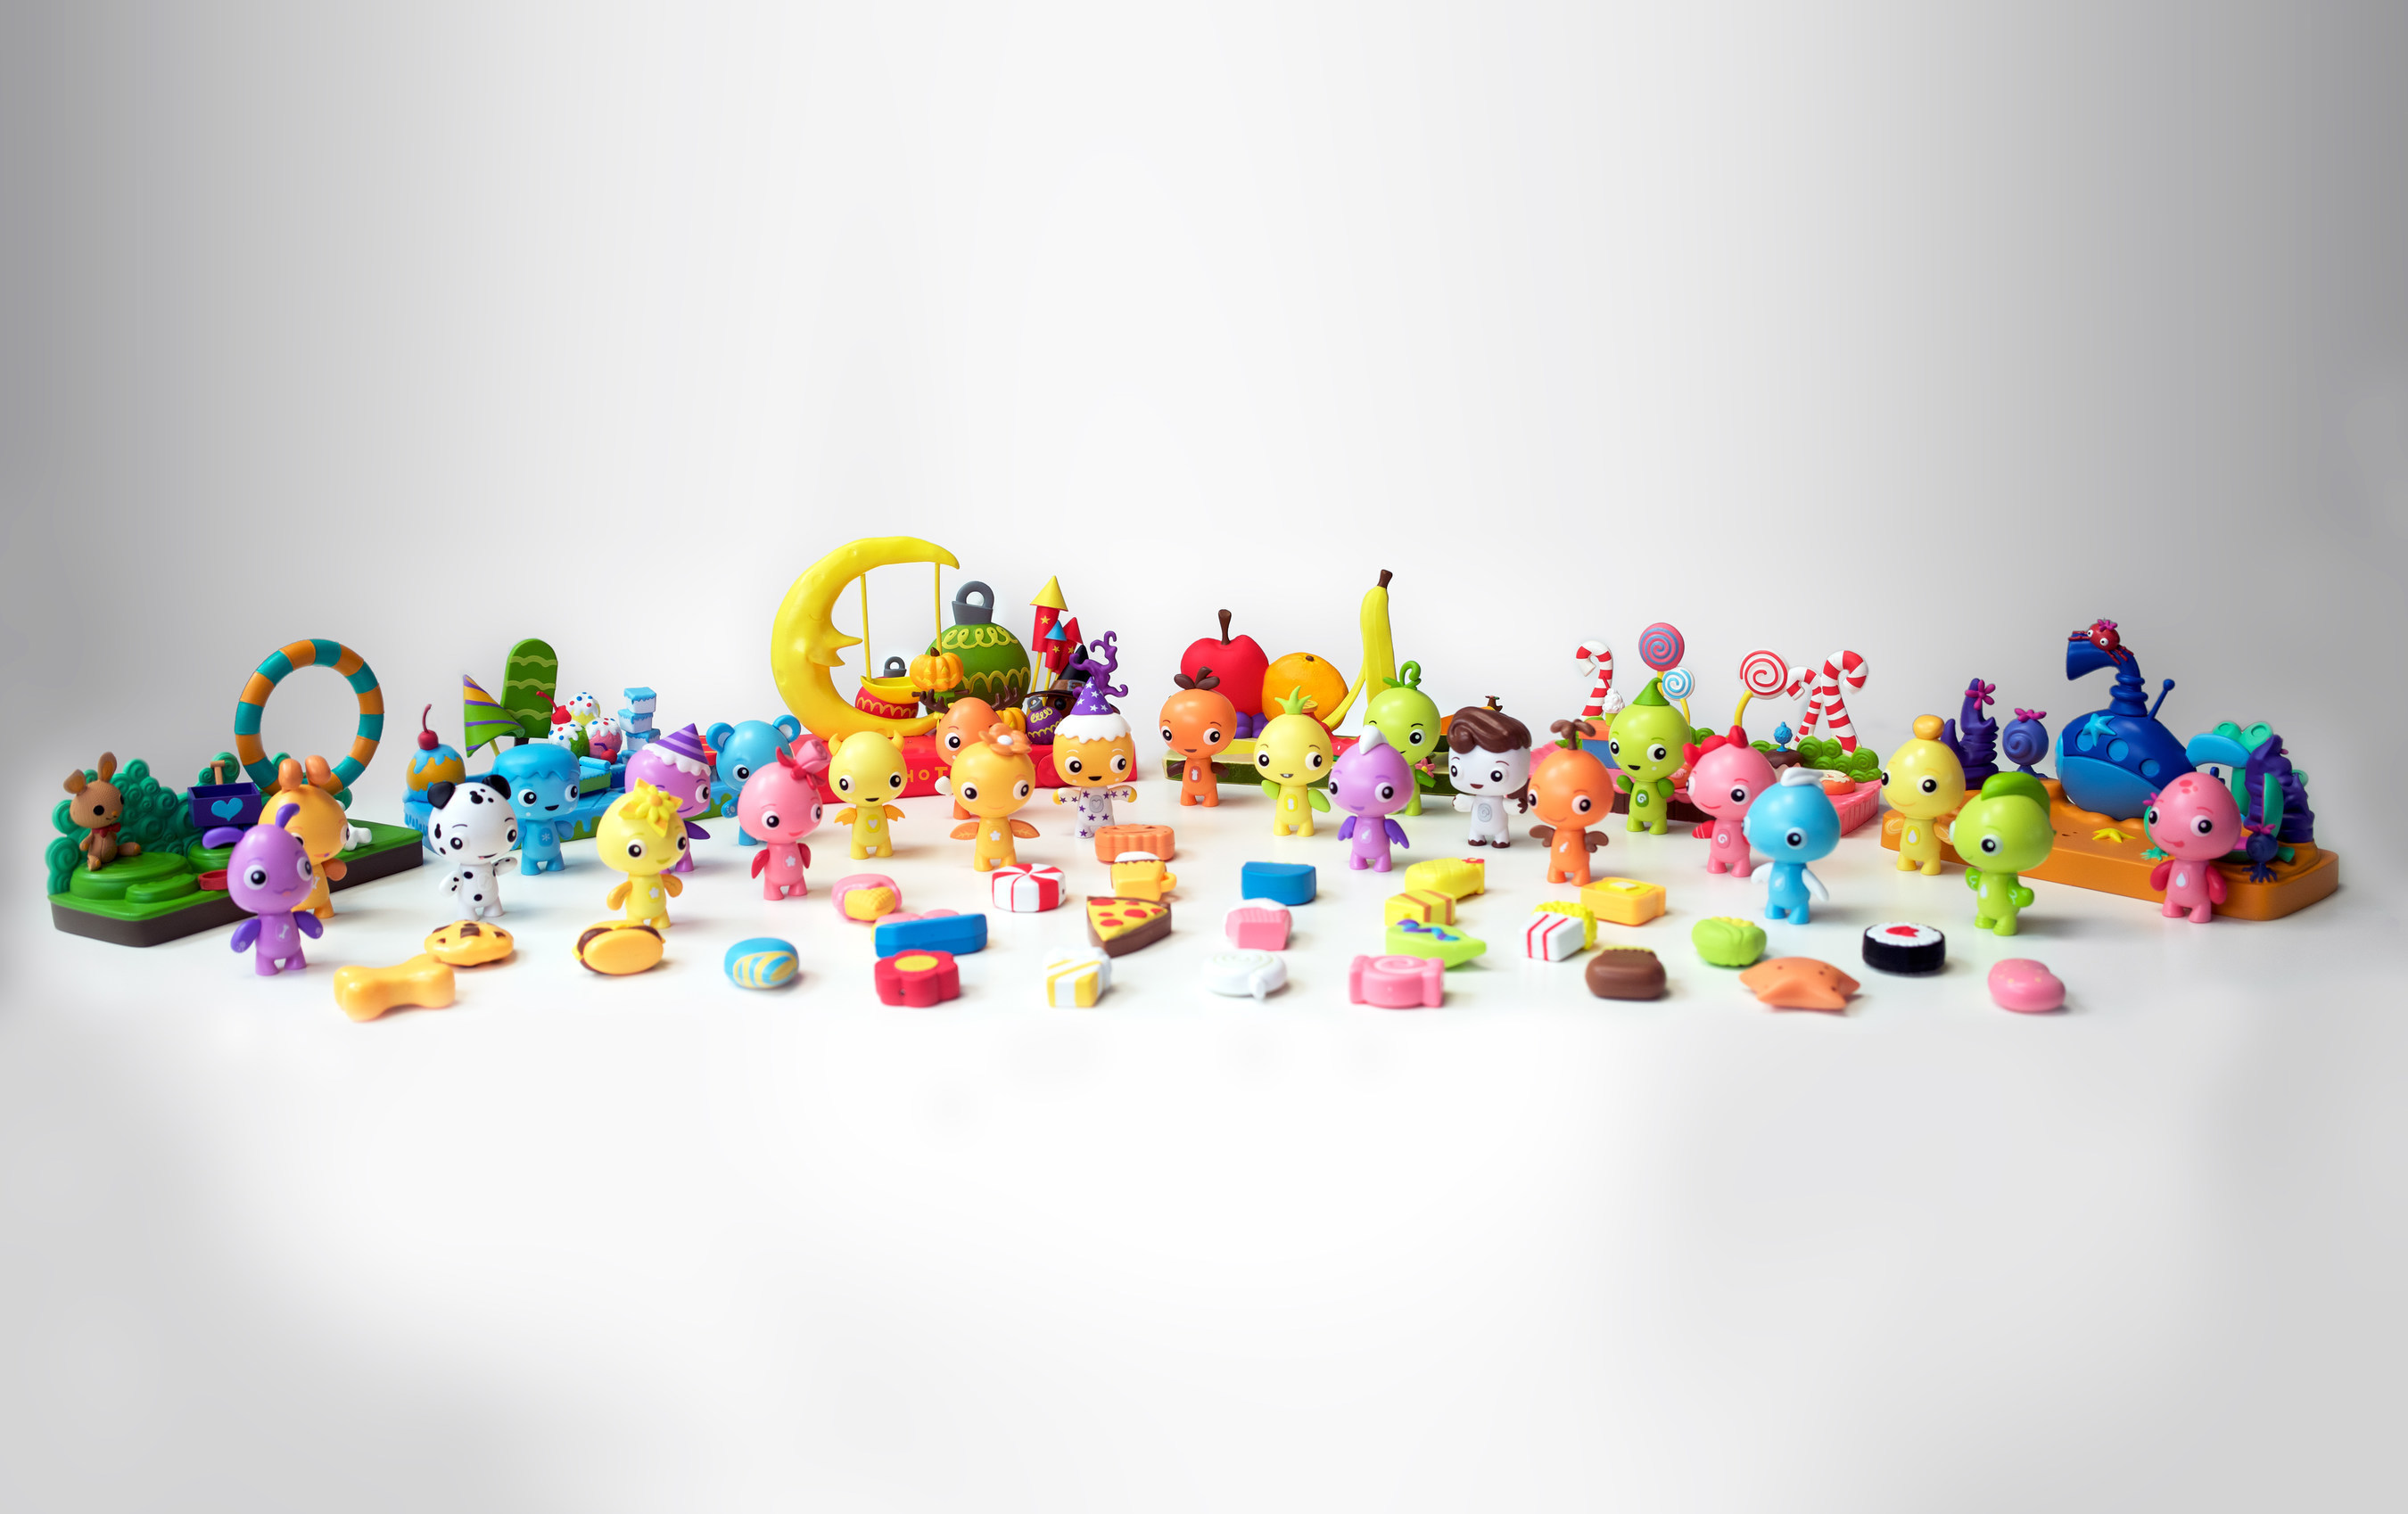 Discover the MagicMeeMees! A new line of interactive collectible characters from Future of Play